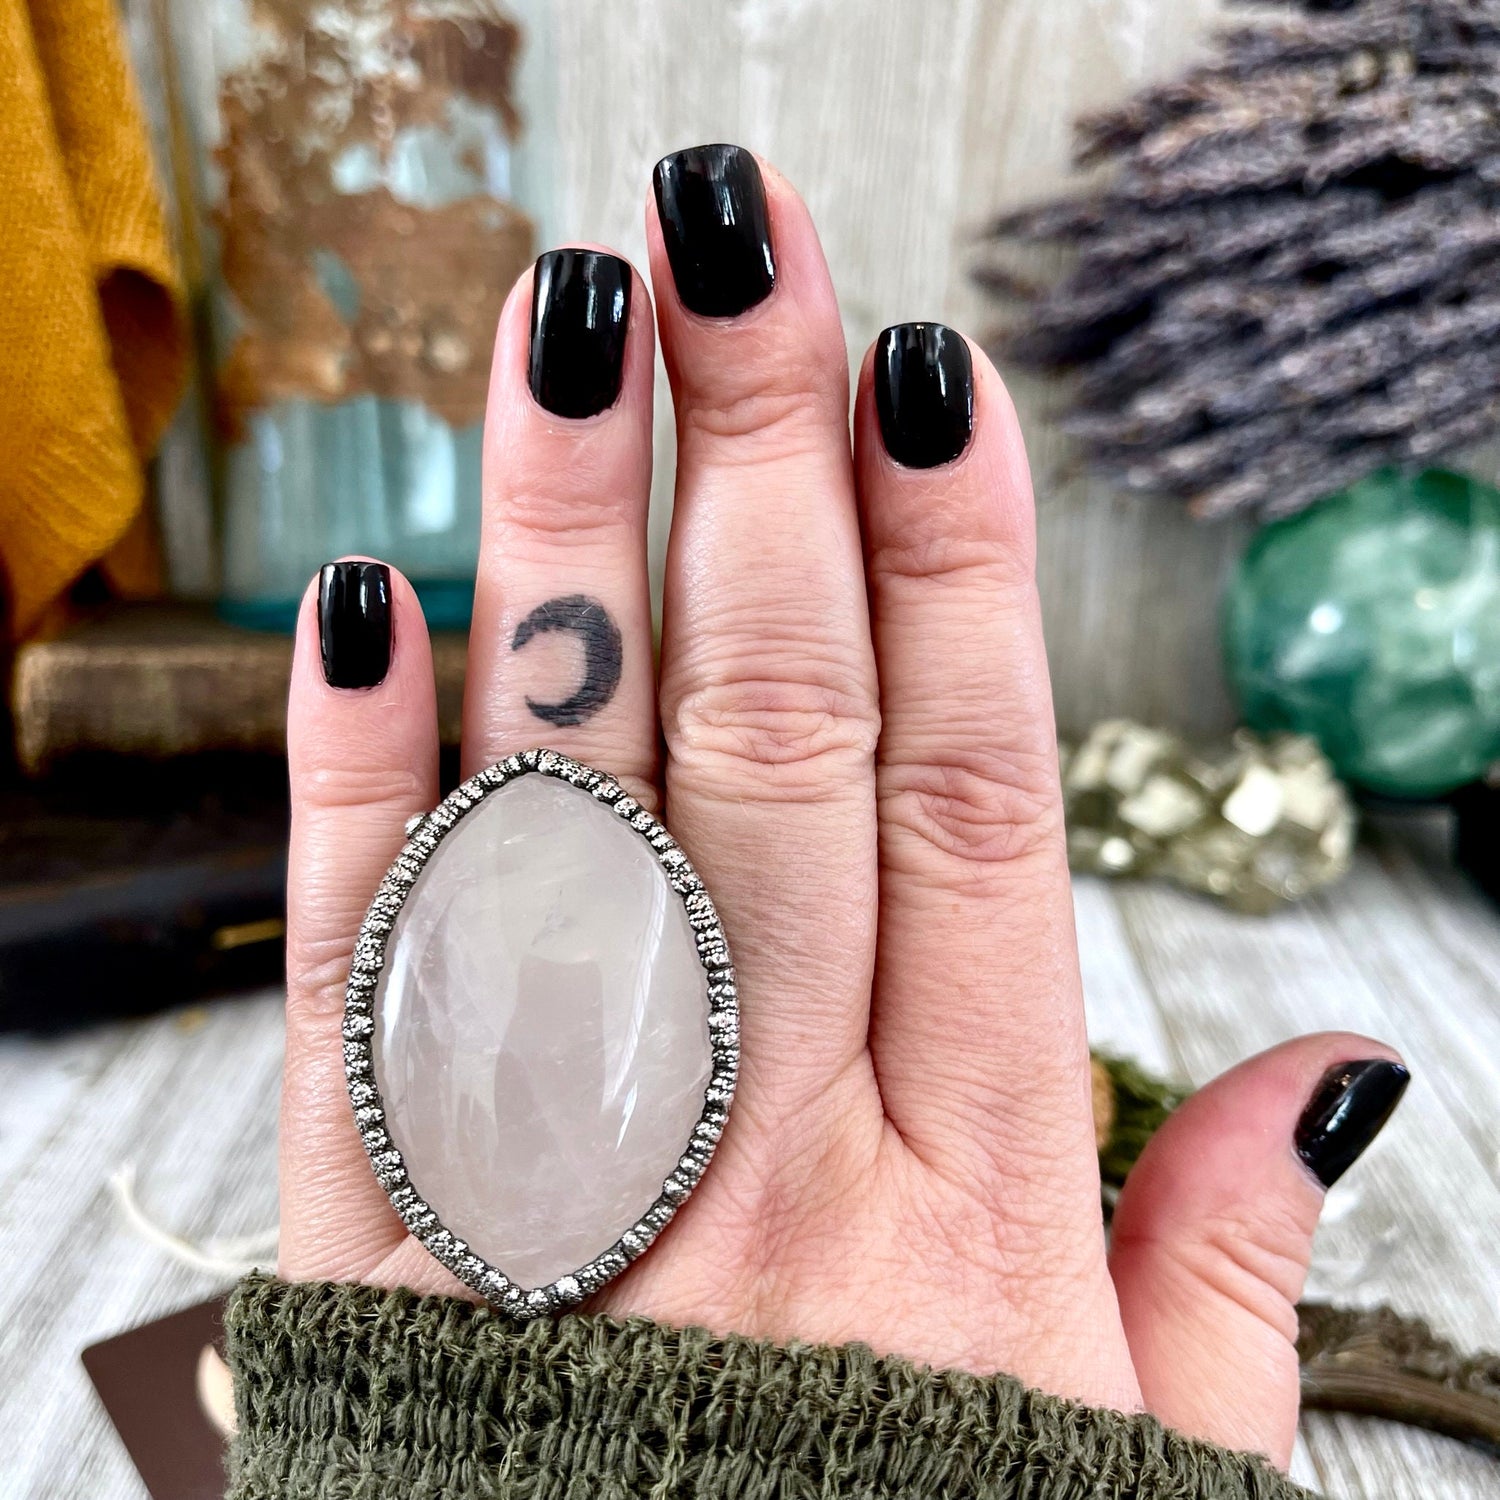 Size 7.5 Big Pink Rose Quartz Crystal Ring in Fine Silver - Pink Stone Jewelry / Foxlark Collection - One of a Kind // Boho Statement Ring